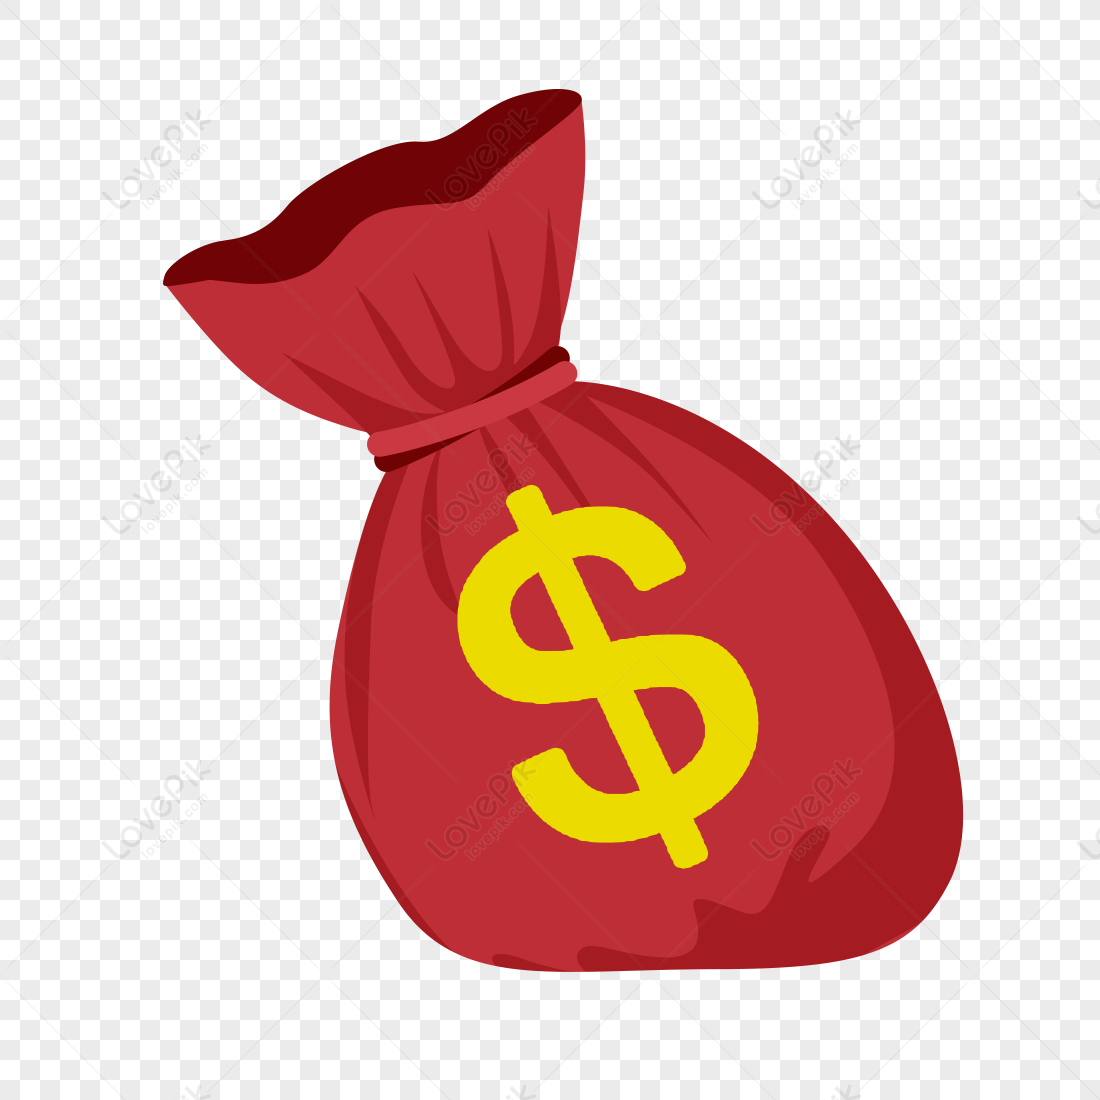 Download Money Bag Png - Gucci Bag With Money PNG Image with No Background  - PNGkey.com